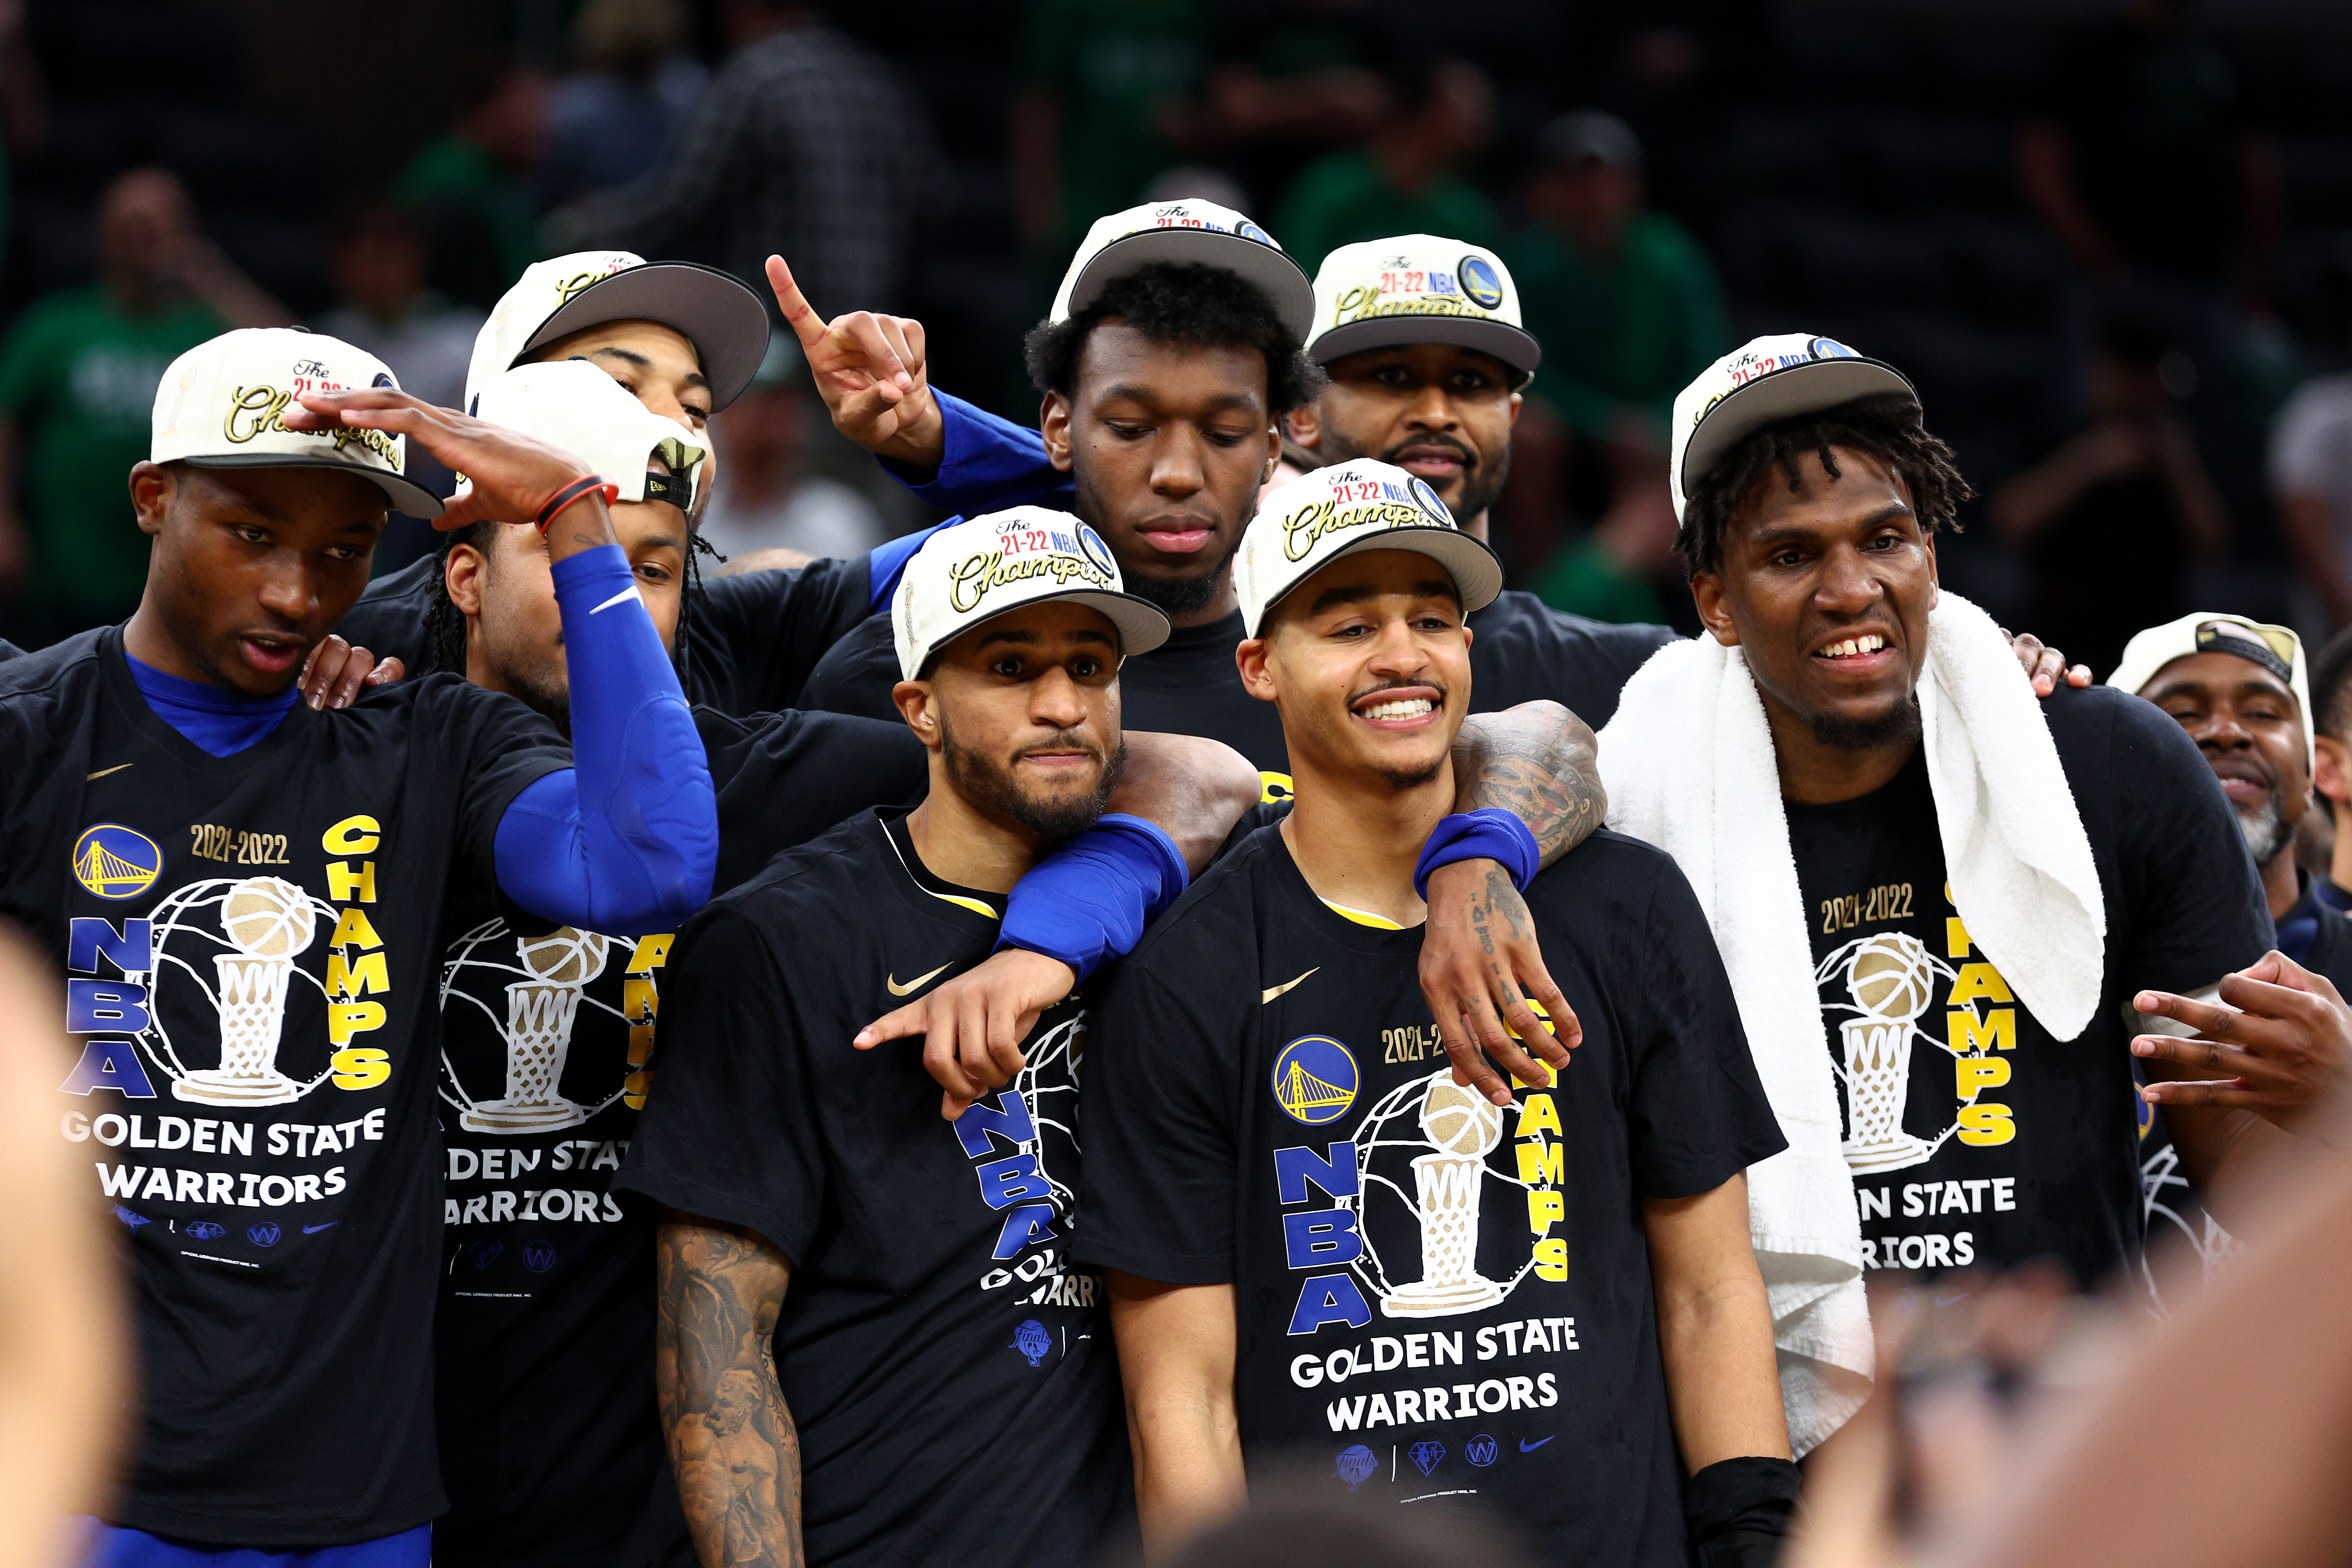 NBA's Reigning Champs [Golden State Warriors] 🏆